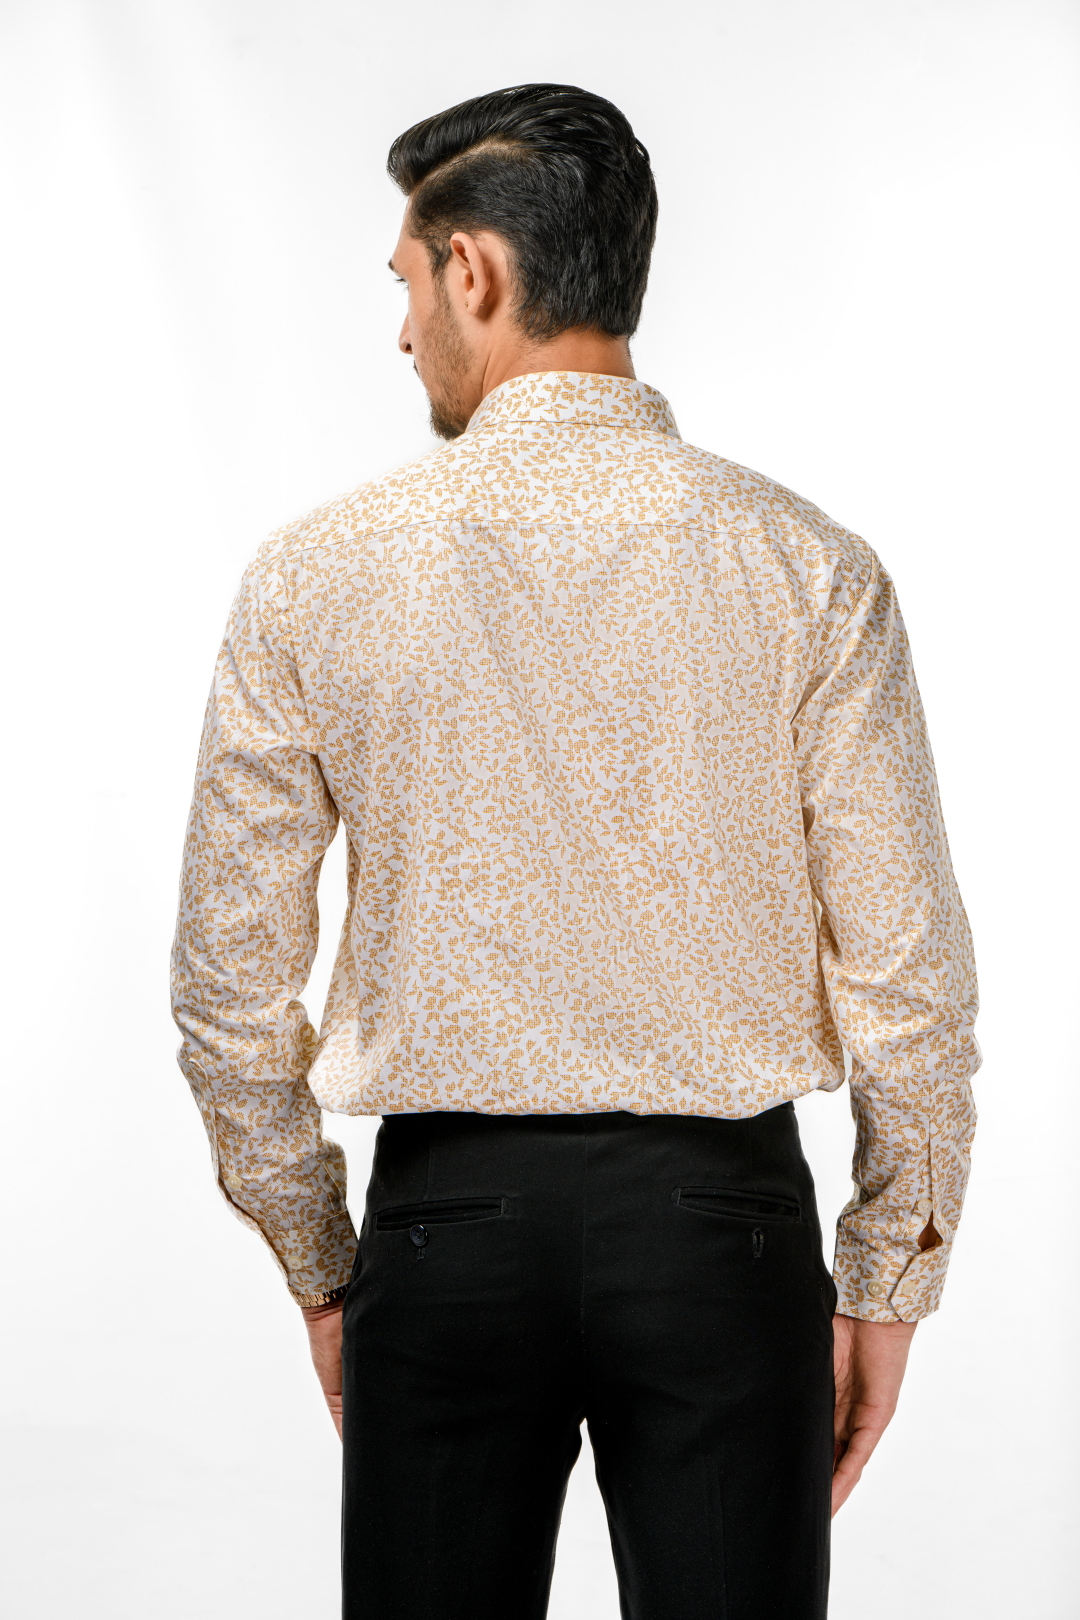 Tissufin White With Light Yellow Floral Printed Pure Cotton Shirt